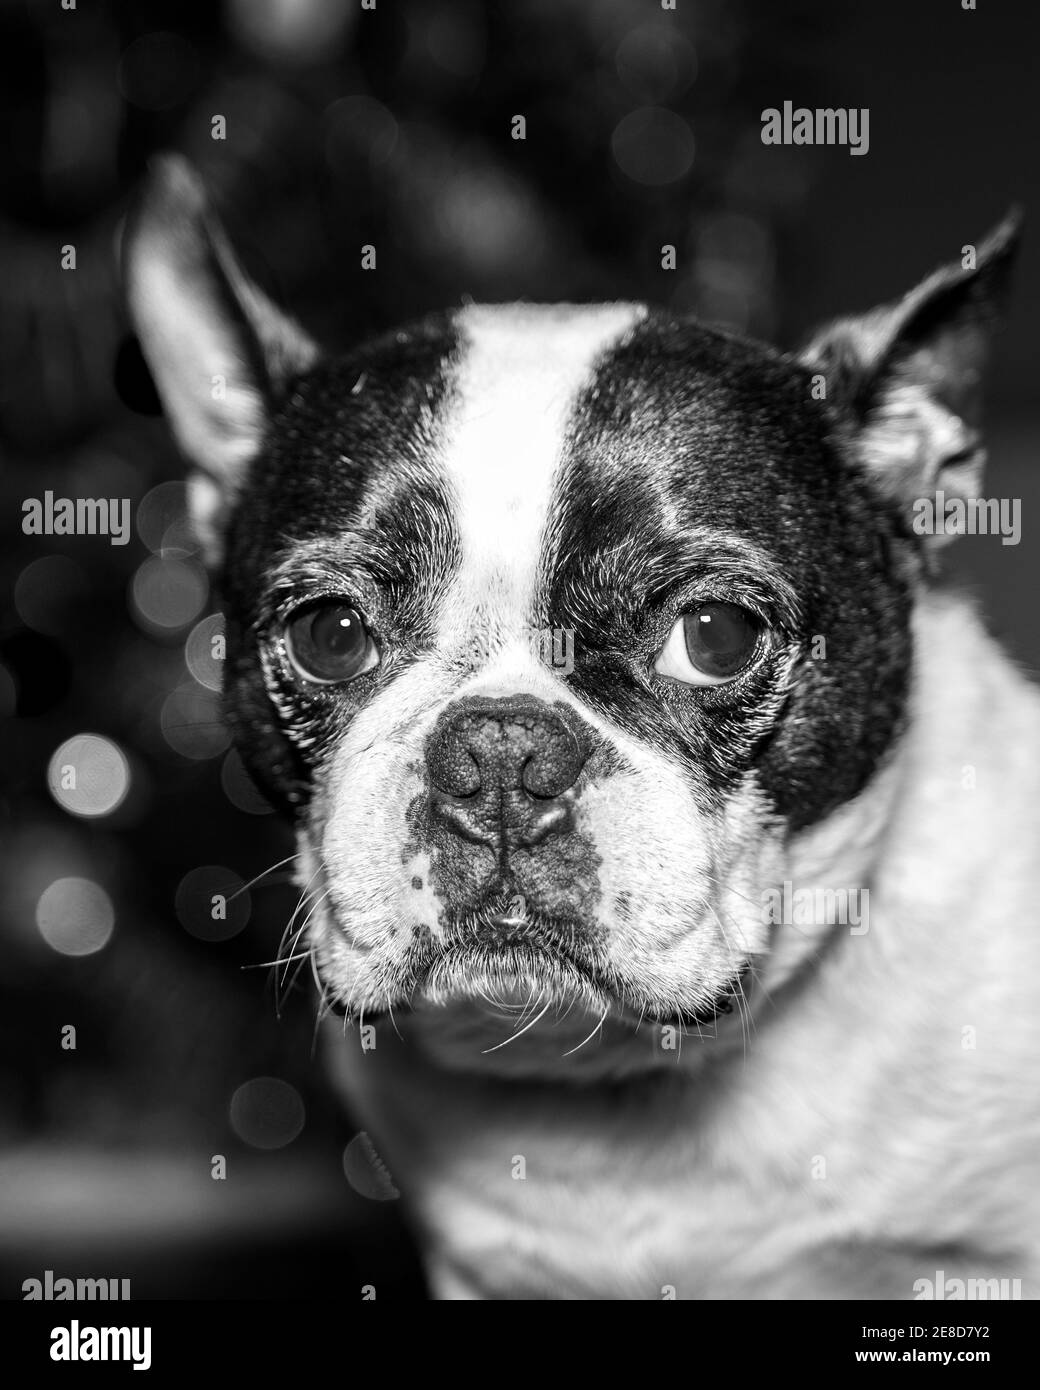 Brindle Boston Terrier head in monochrome with out of focus background Stock Photo